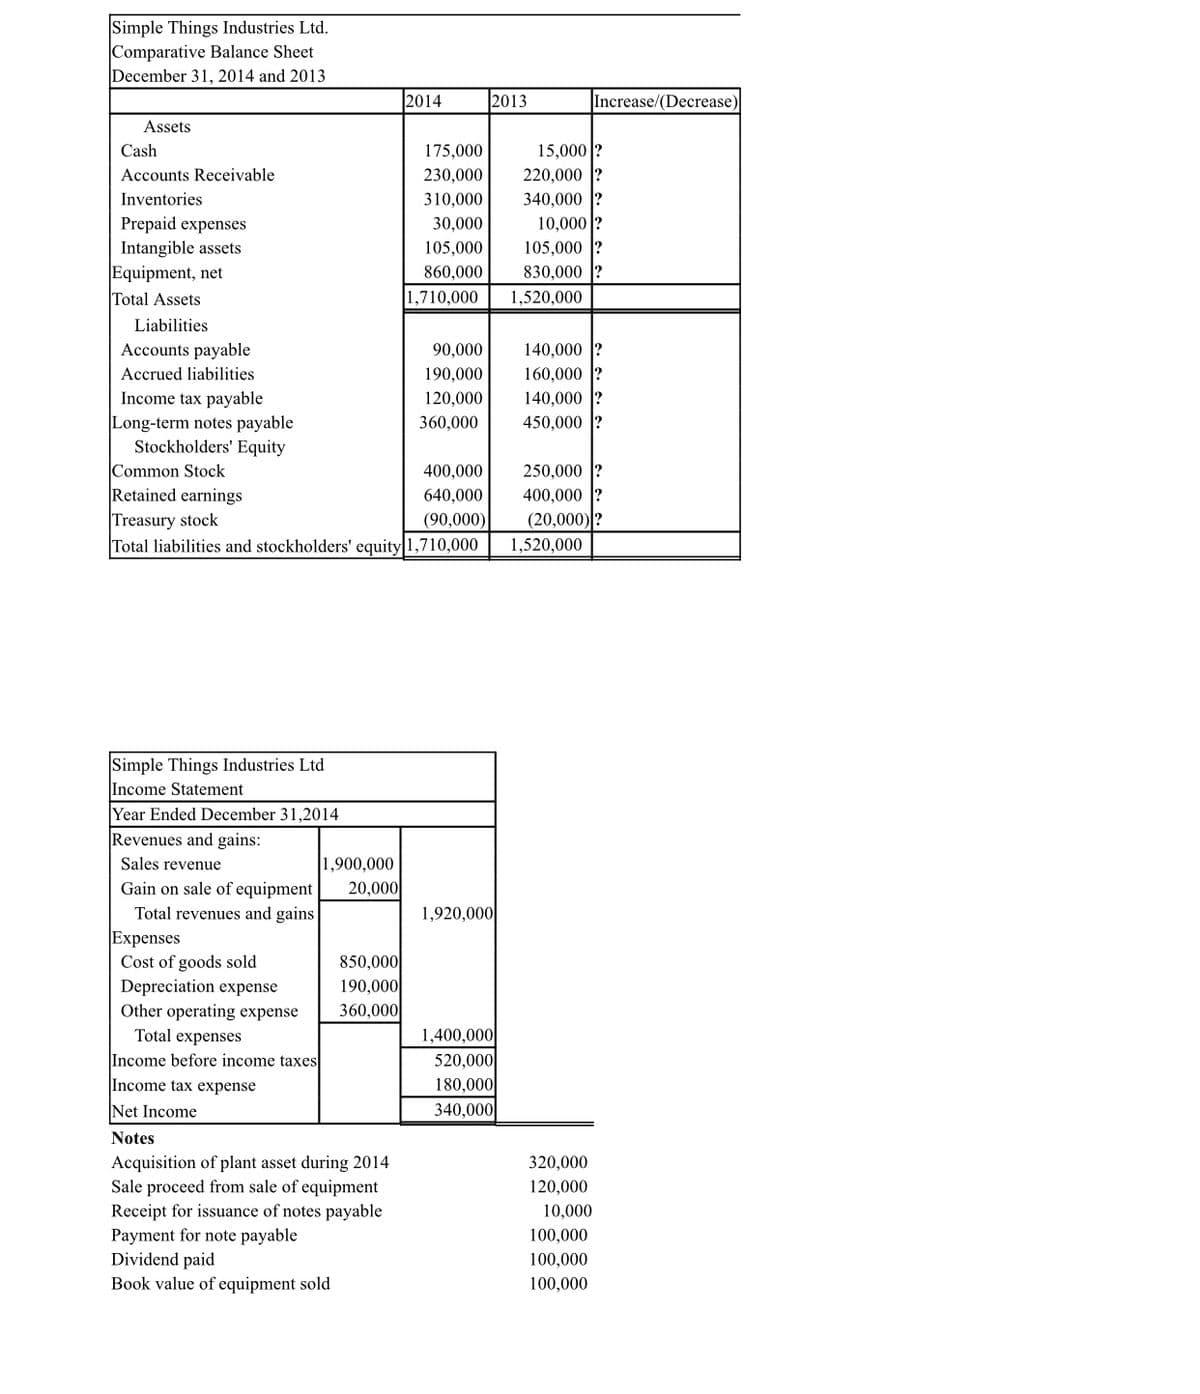 Simple Things Industries Ltd.
Comparative Balance Sheet
December 31, 2014 and 2013
2014
2013
Increase/(Decrease)
Assets
Cash
175,000
15,000 ?
Accounts Receivable
230,000
220,000
Inventories
310,000
340,000 ?
Prepaid expenses
Intangible assets
30,000
10,000
105,000
105,000
Equipment, net
Total Assets
860,000
830,000
1,710,000
1,520,000
Liabilities
Accounts payable
90,000
140,000
Accrued liabilities
190,000
160,000
140,000 ?
450,000 ?
Income tax payable
Long-term notes payable
tockholders' Equity
Common Stock
Retained earnings
Treasury stock
Total liabilities and stockholders' equity 1,710,000
120,000
360,000
250,000 ?
400,000 ?
(20,000)?
400,000
640,000
(90,000)
1,520,000
Simple Things Industries Ltd
Income Statement
Year Ended December 31,2014
Revenues and gains:
1,900,000
20,000
Sales revenue
Gain on sale of equipment
Total revenues and gains
1,920,000
Expenses
Cost of goods sold
850,000
Depreciation expense
Other operating expense
Total expenses
190,000
360,000
1,400,000
520,000
180,000
340,000
Income before income taxes
Income tax expense
Net Income
Notes
Acquisition of plant asset during 2014
Sale proceed from sale of equipment
Receipt for issuance of notes payable
320,000
120,000
10,000
Payment for note payable
Dividend paid
Book value of equipment sold
100,000
100,000
100,000
